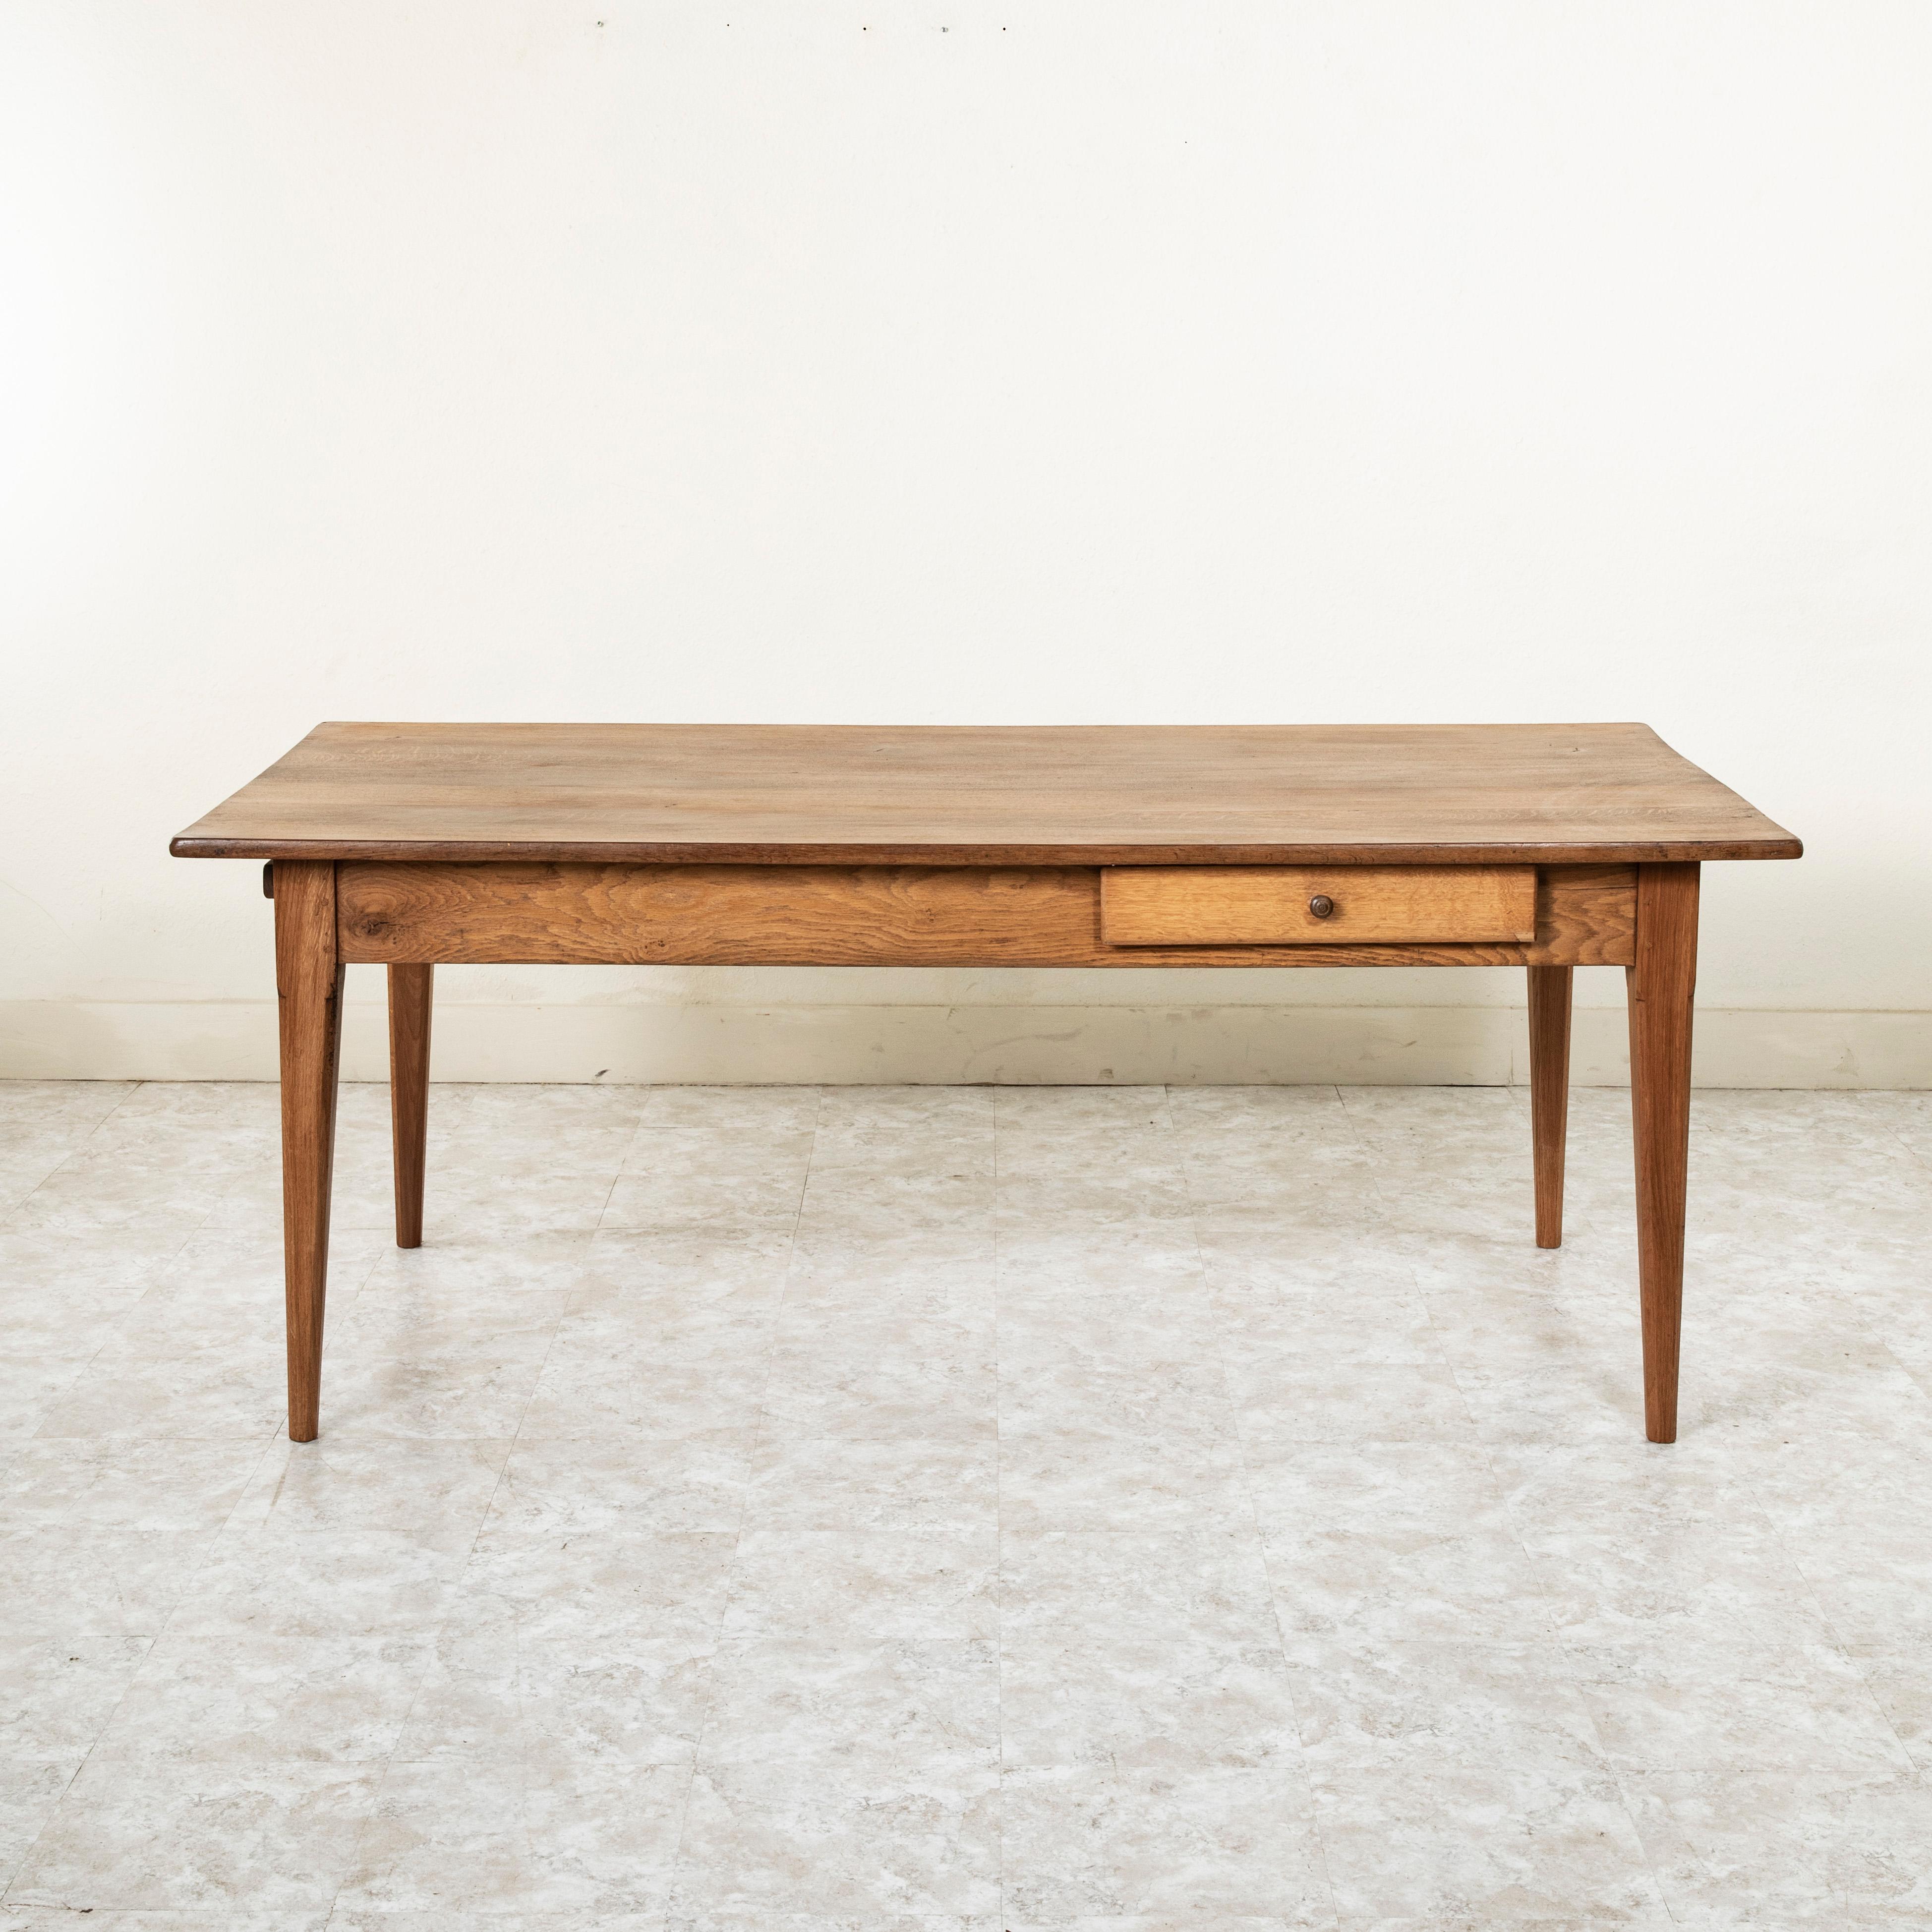 This artisan made farm table from the turn of the 20th century is from the region of Le Perche, a sub-region of Normandy, France. Its oak top measures 78 inches long and 39 inches wide. Resting on a hand pegged oak base of mortise and tenon joinery